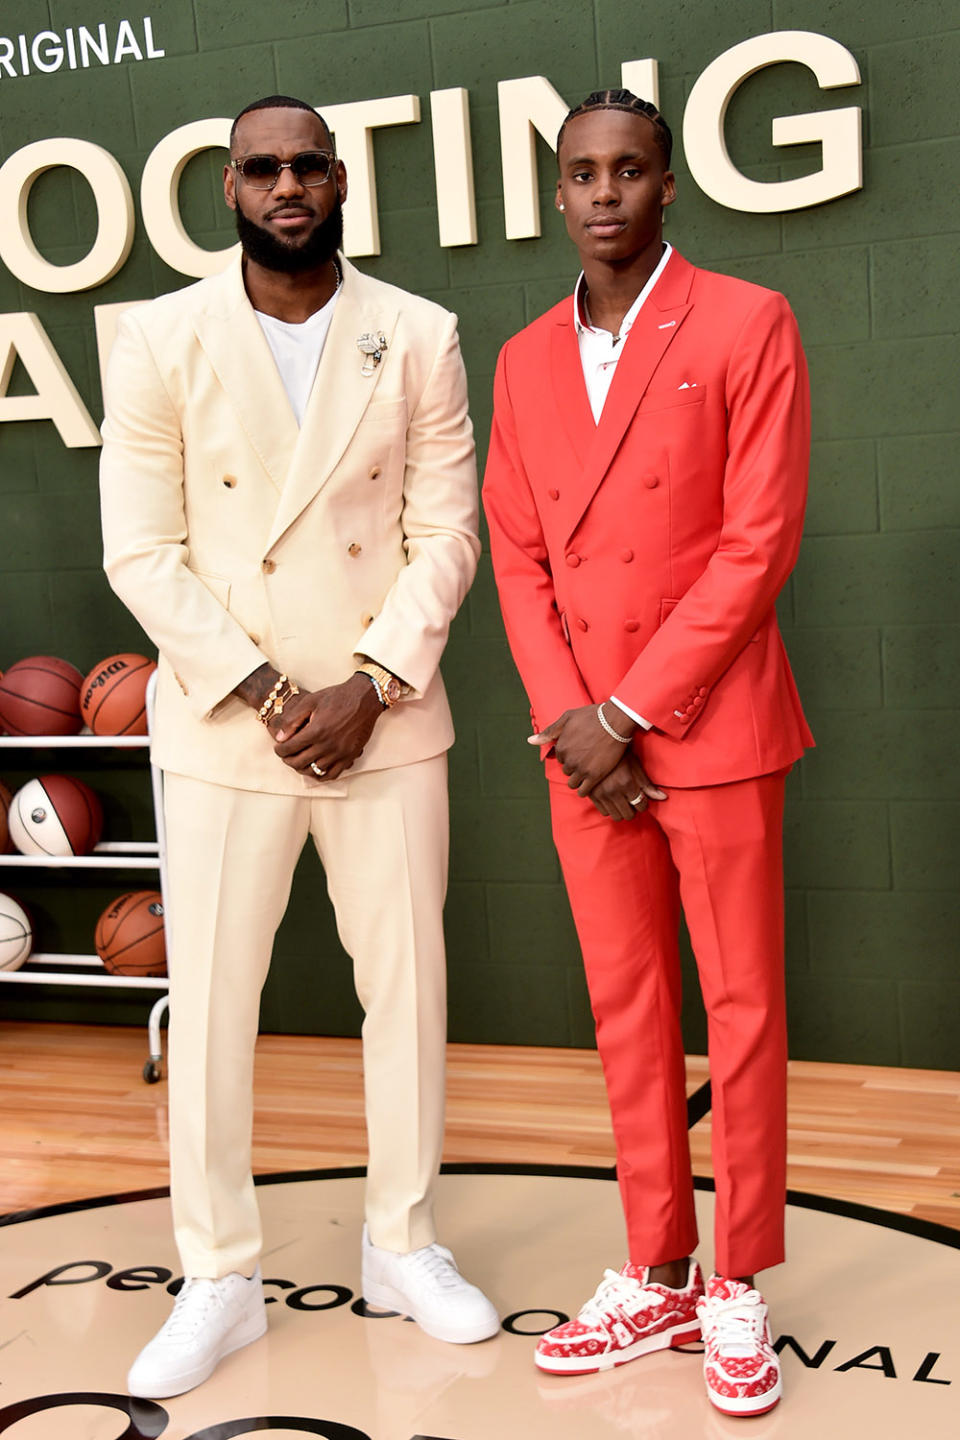 (L-R) LeBron James and Marquis "Mookie" Cook attend the Los Angeles premiere of Universal Pictures' "Shooting Stars" on May 31, 2023 in Los Angeles, California.